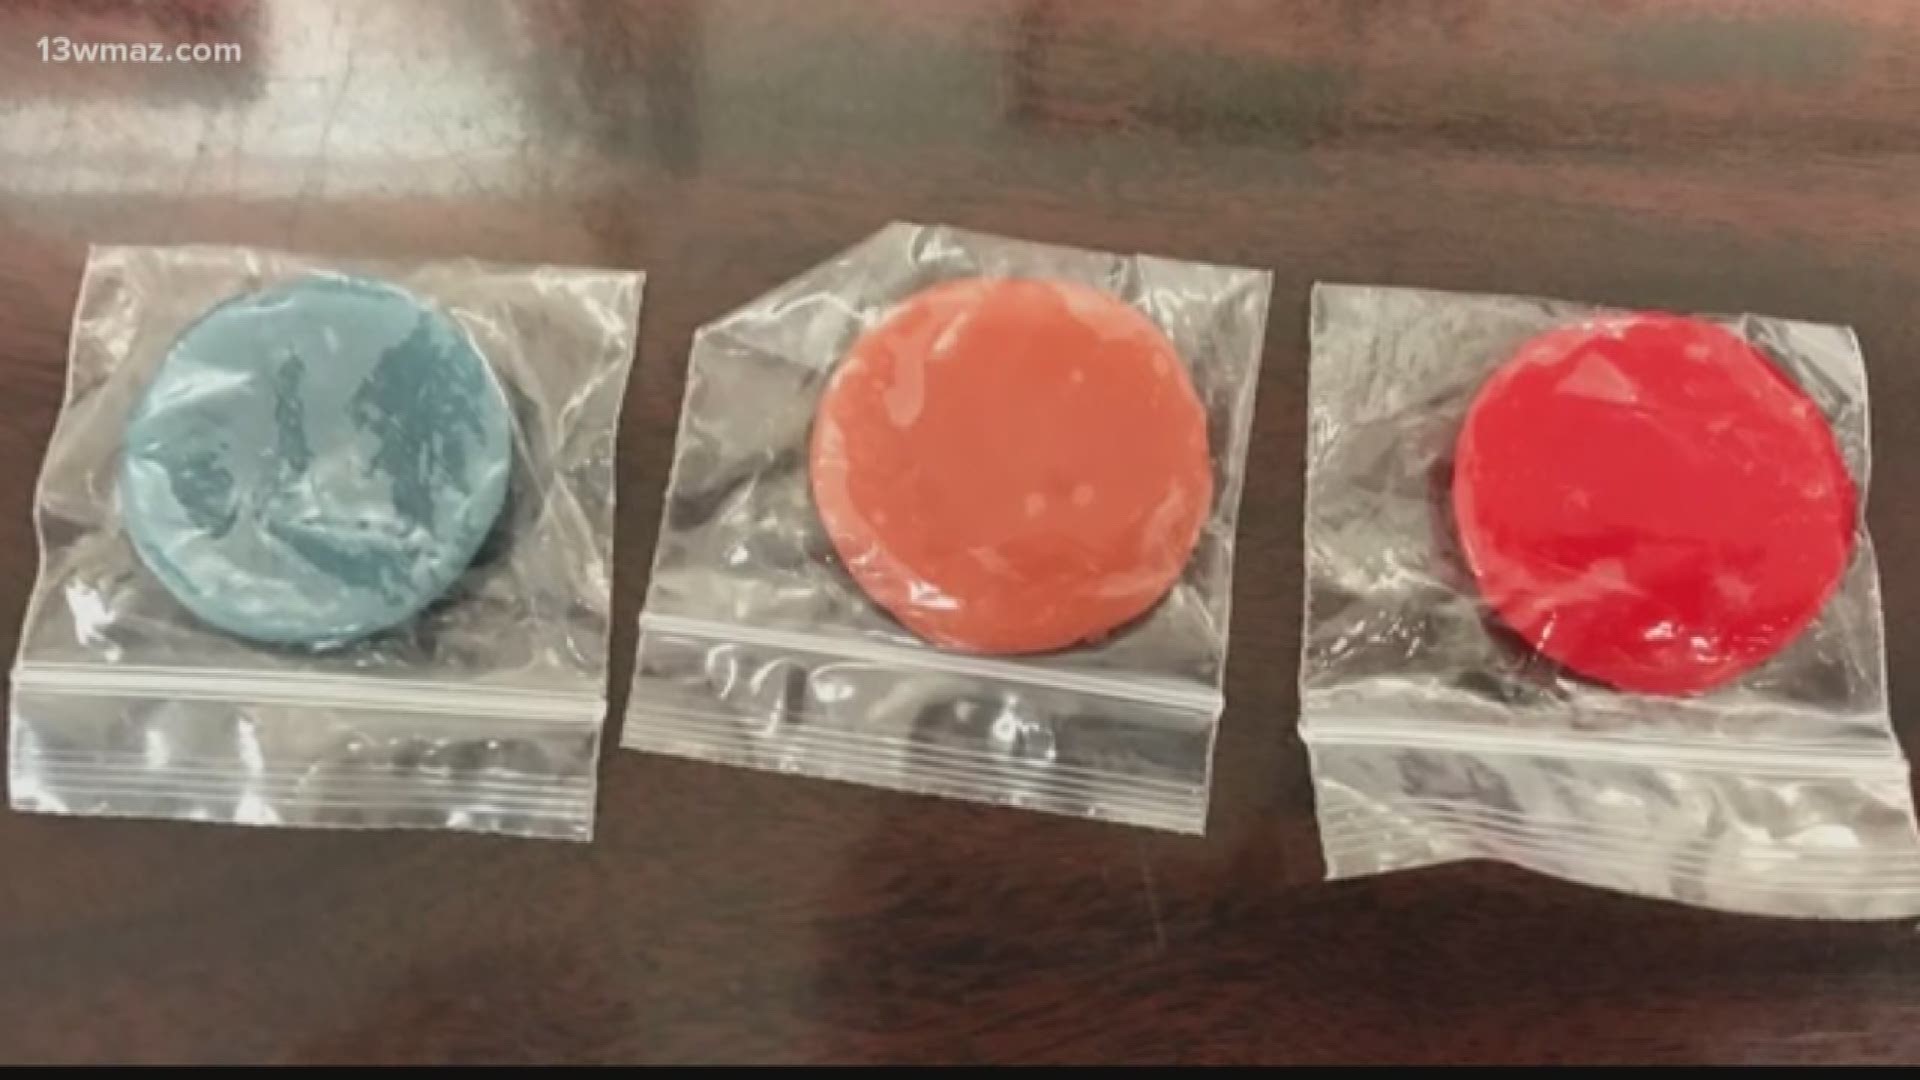 Some parents in Jones County are worried after district leaders say a student brought marijuana candy to school. Here's how that form of marijuana could affect children, and what you need to know as a parent.